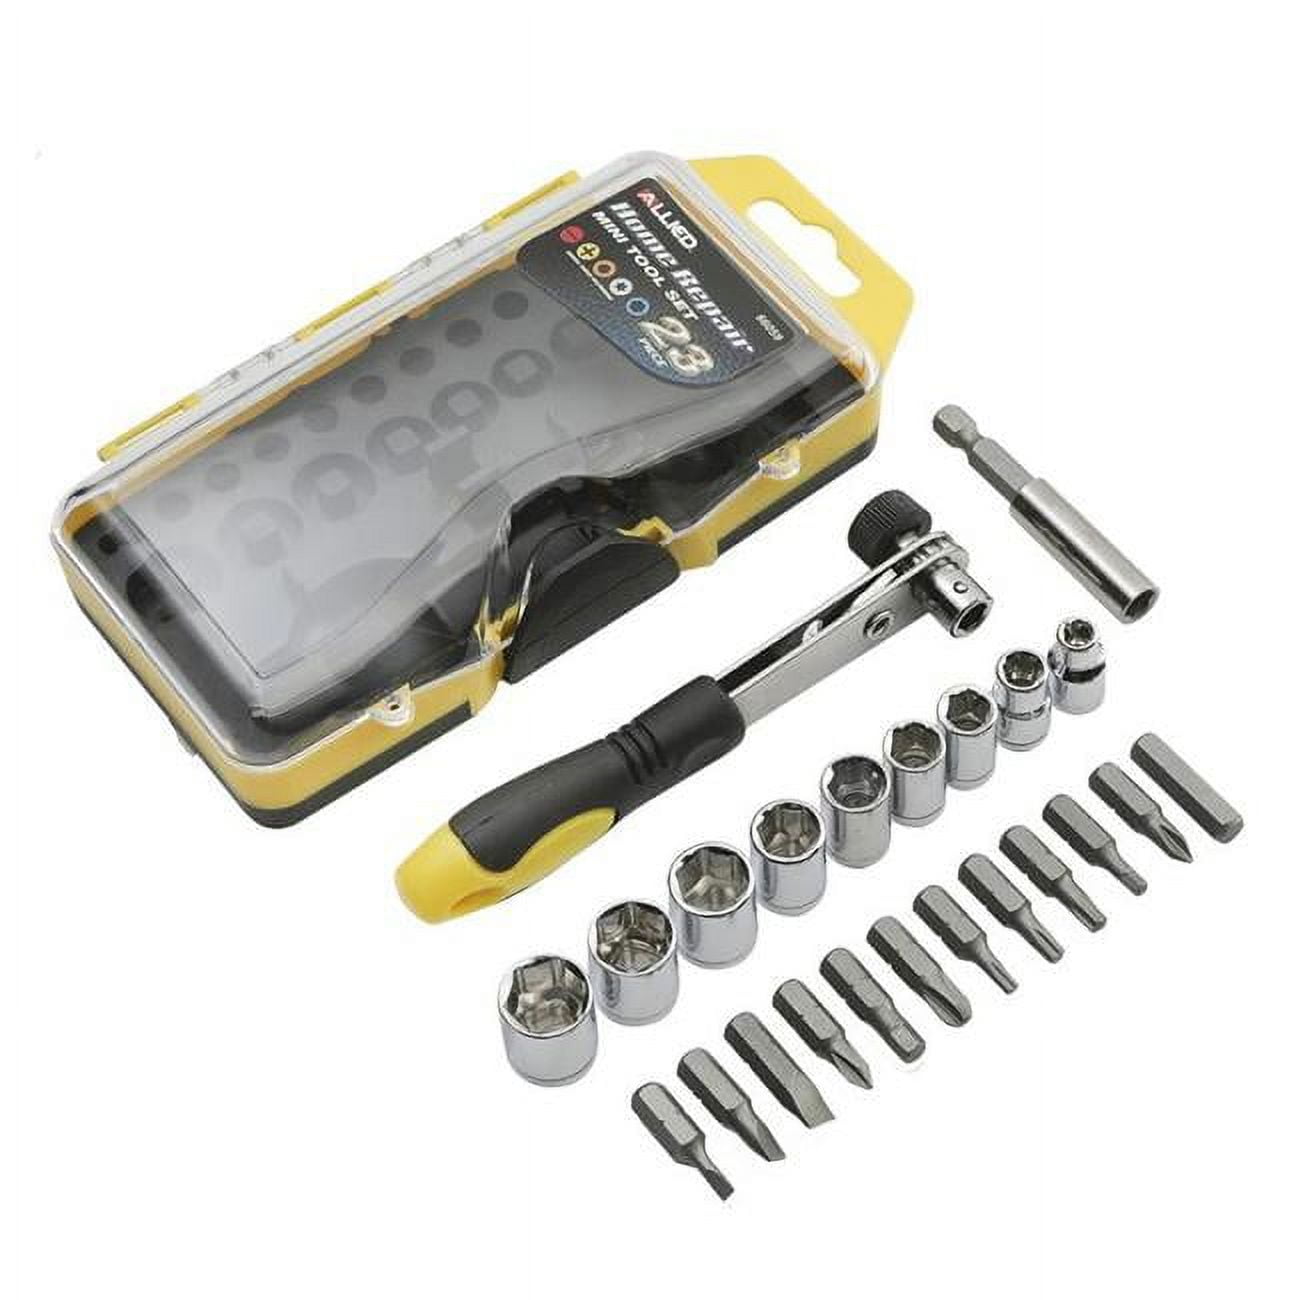 Picture of Allied 66059 Mini Tool Set - 23 Piece